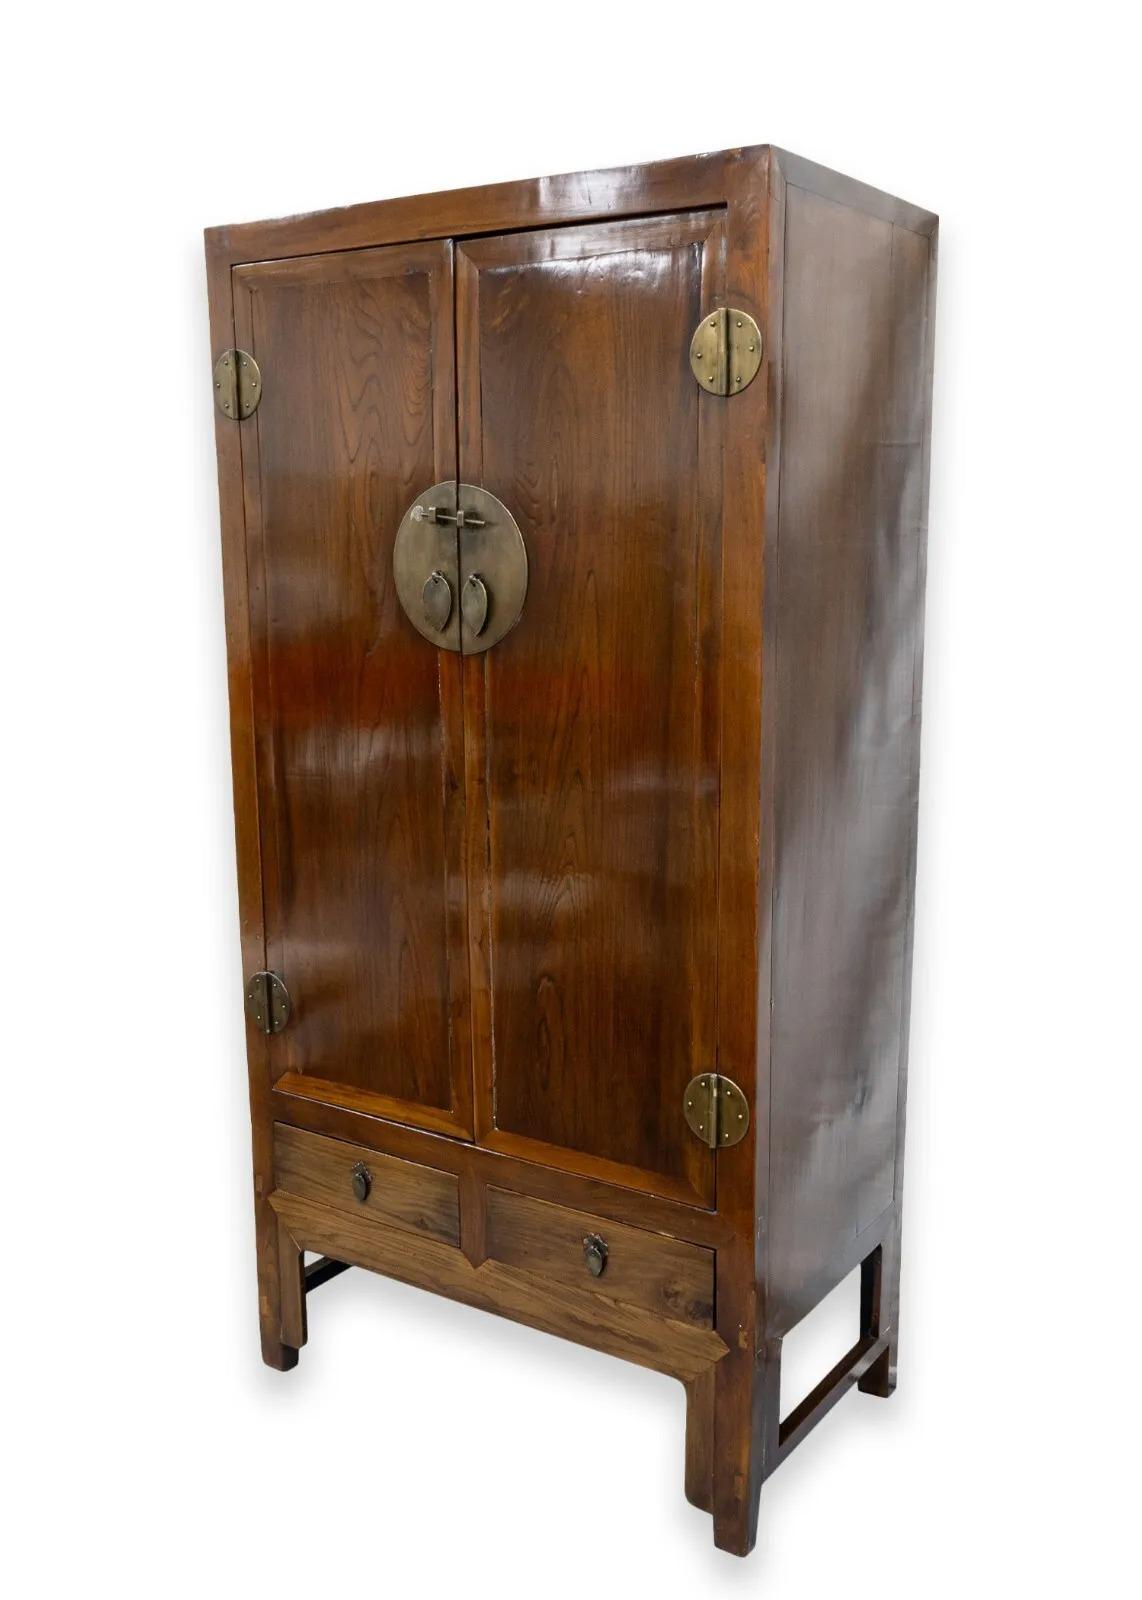 A vintage Qing Dynasty style Asian armoire cabinet. A stunning piece of furniture to add to your living room or bedroom space. This lovely cabinet features a full wood construction with a dark, rich coloration and beautiful grain. The face features